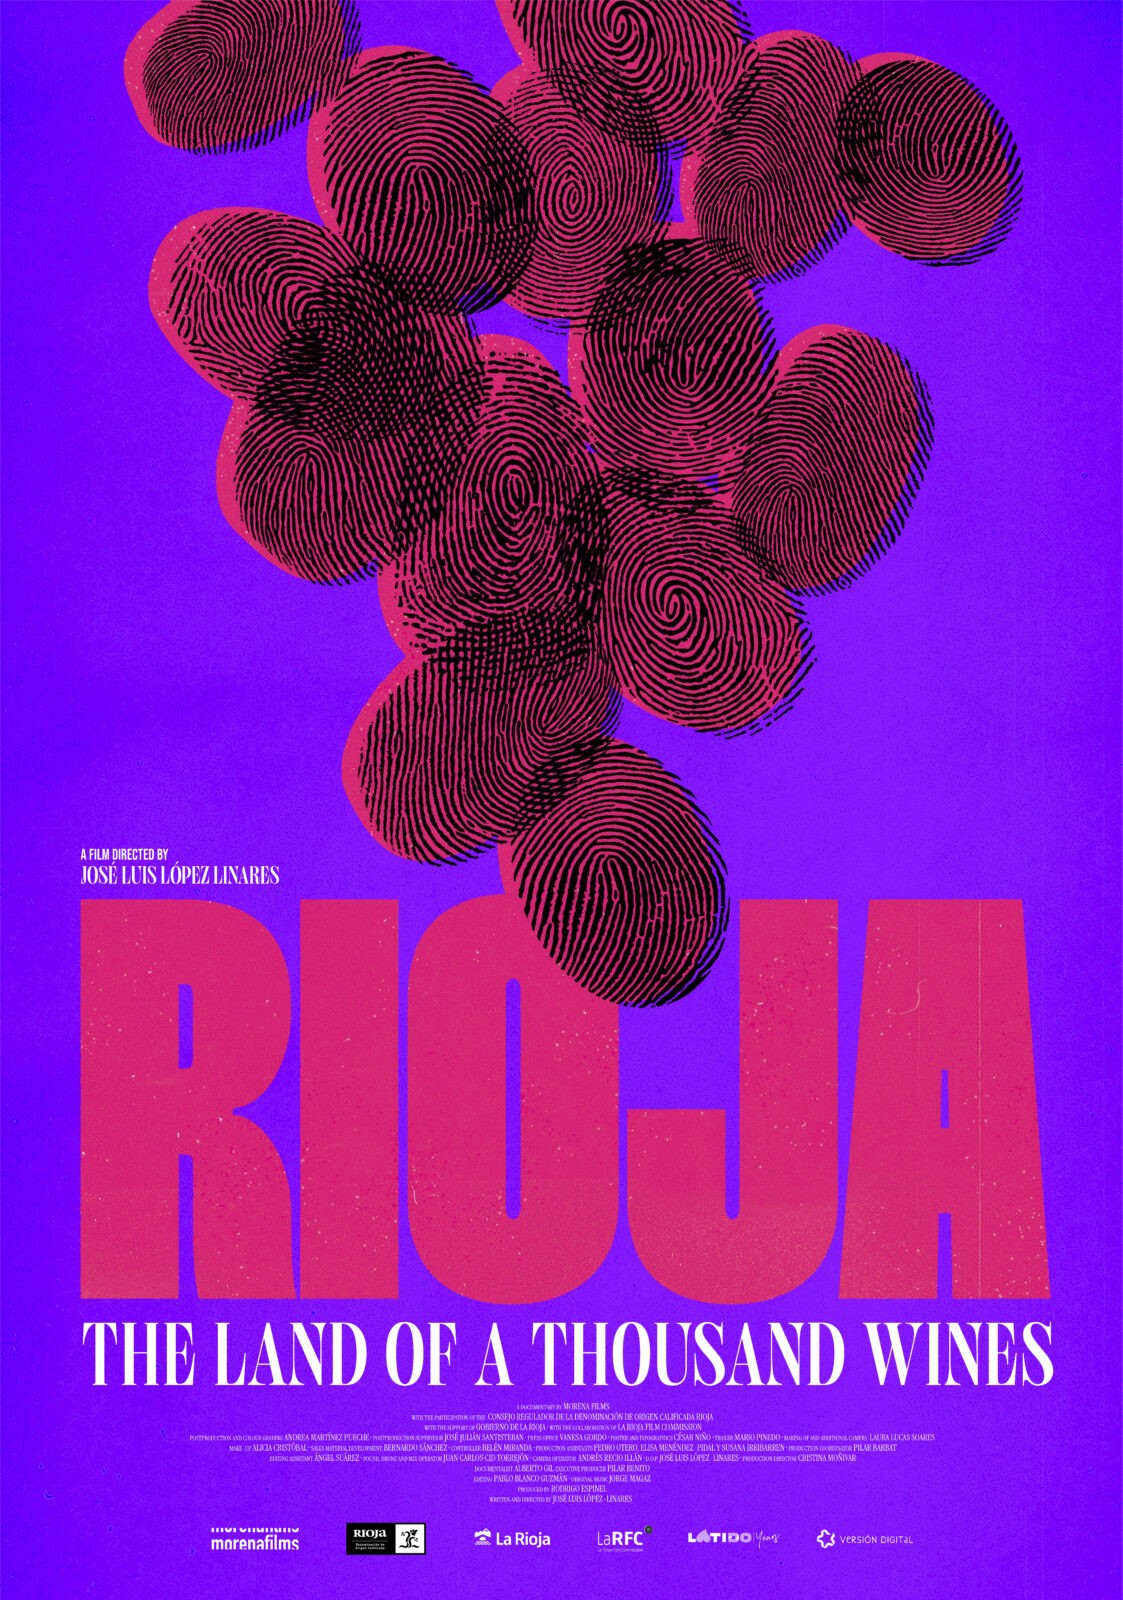 RIOJA: THE LAND OF A THOUSAND WINES